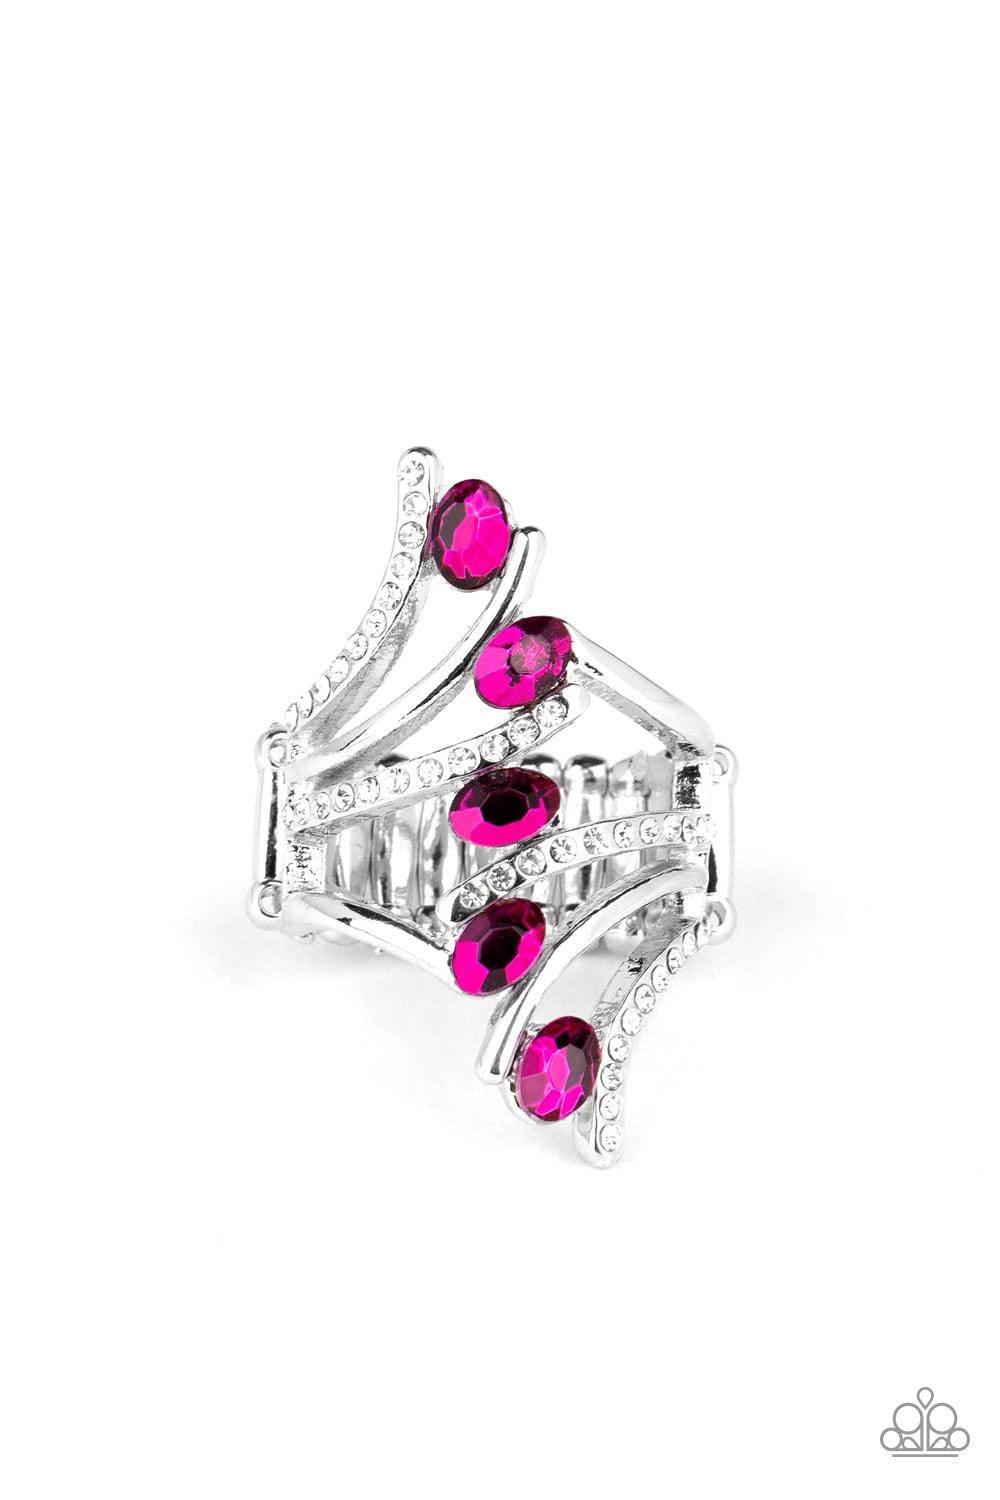 Paparazzi Accessories - Majestic Marvel - Pink Ring - Bling by JessieK